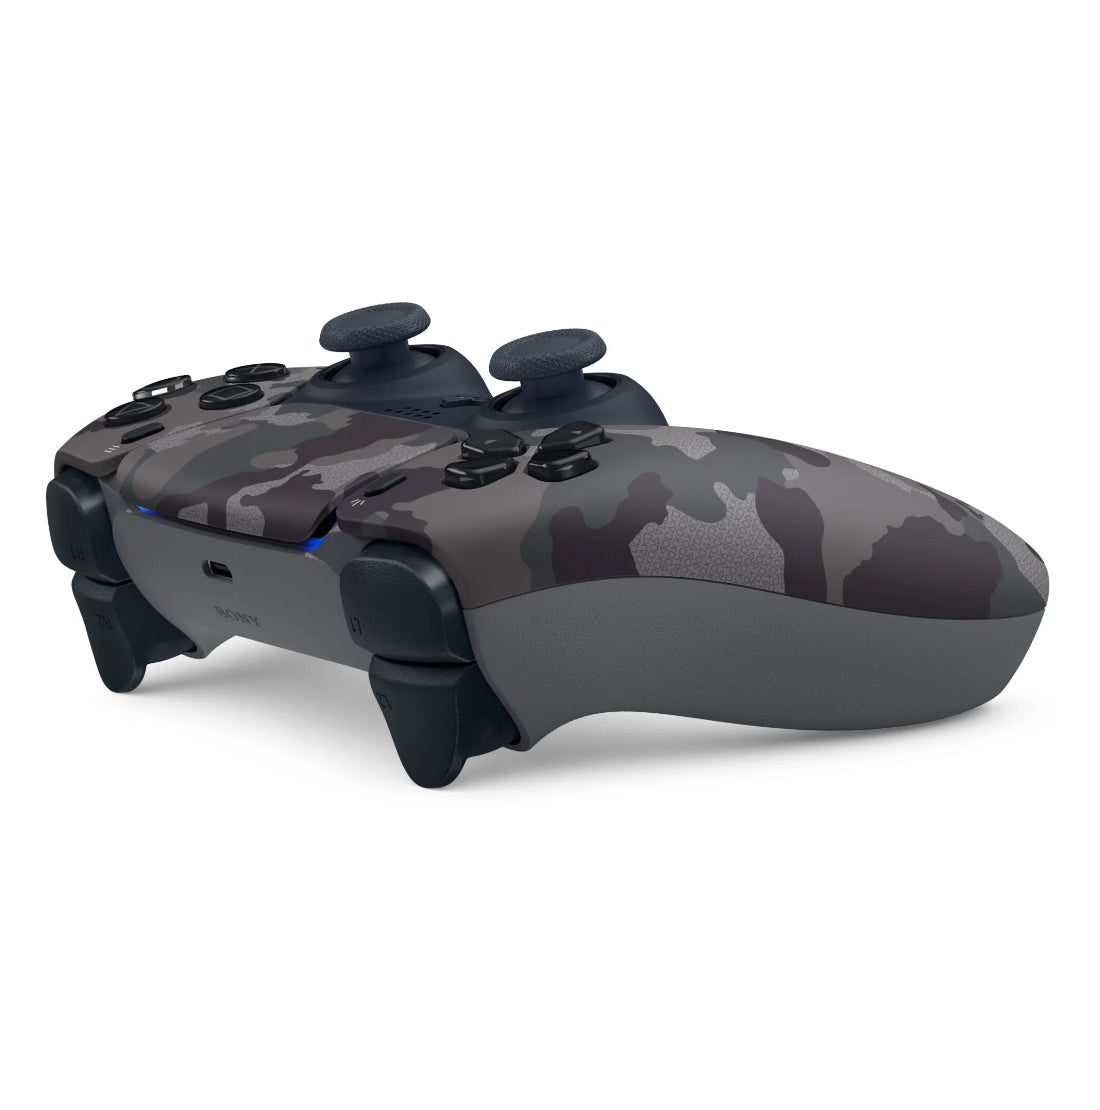 Sony Playstation 5 Disc Edition with Extra Gray Camo Controller and QuickType 2.0 Controller Keypad Bundle - Pro-Distributing